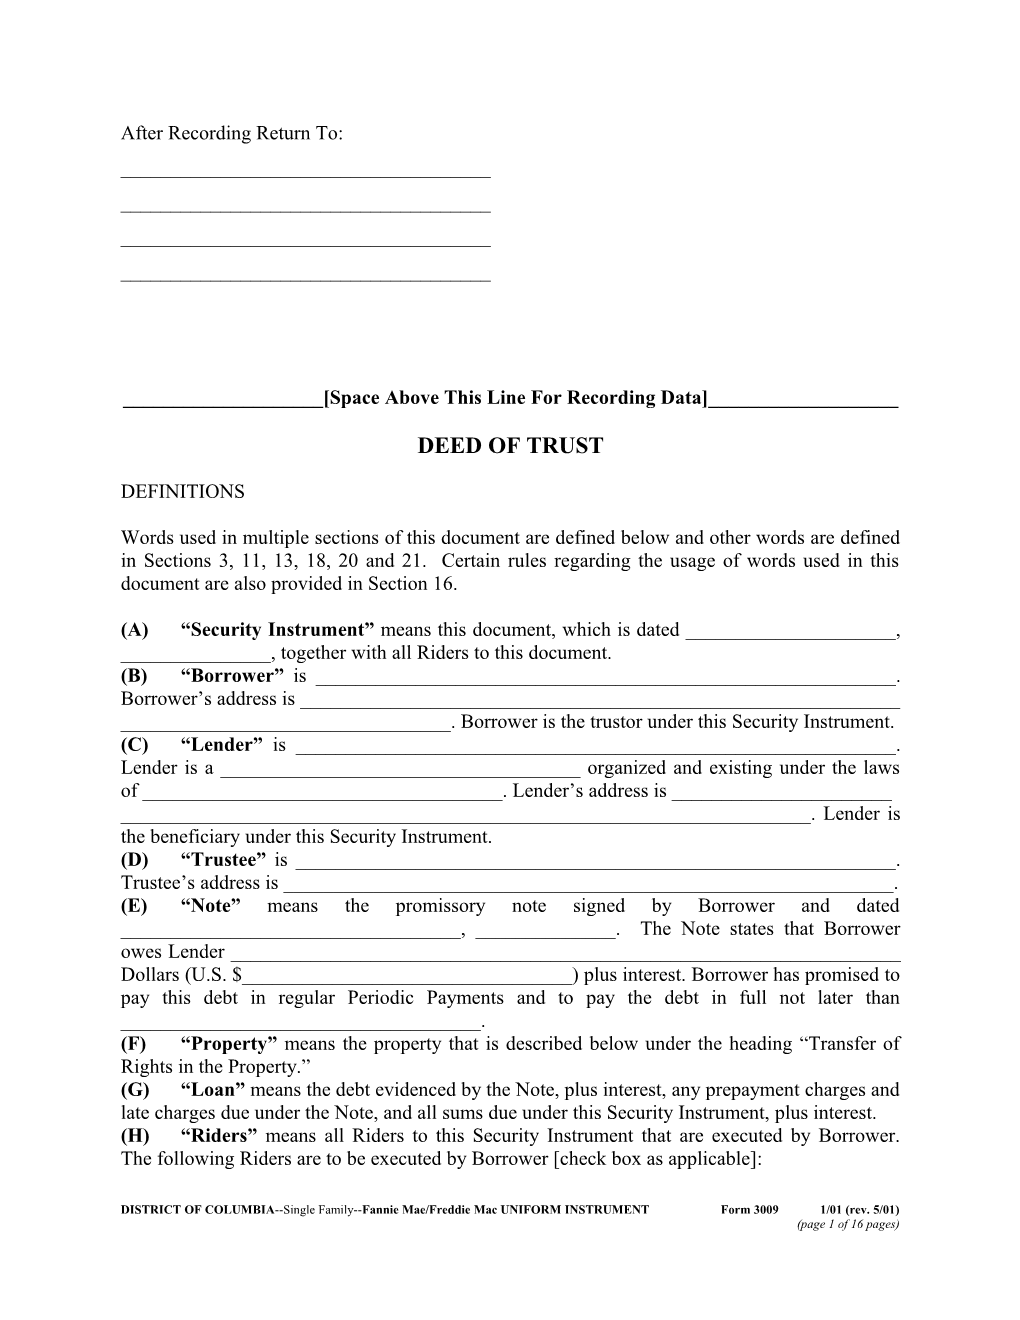 District of Columbia Deed of Trust